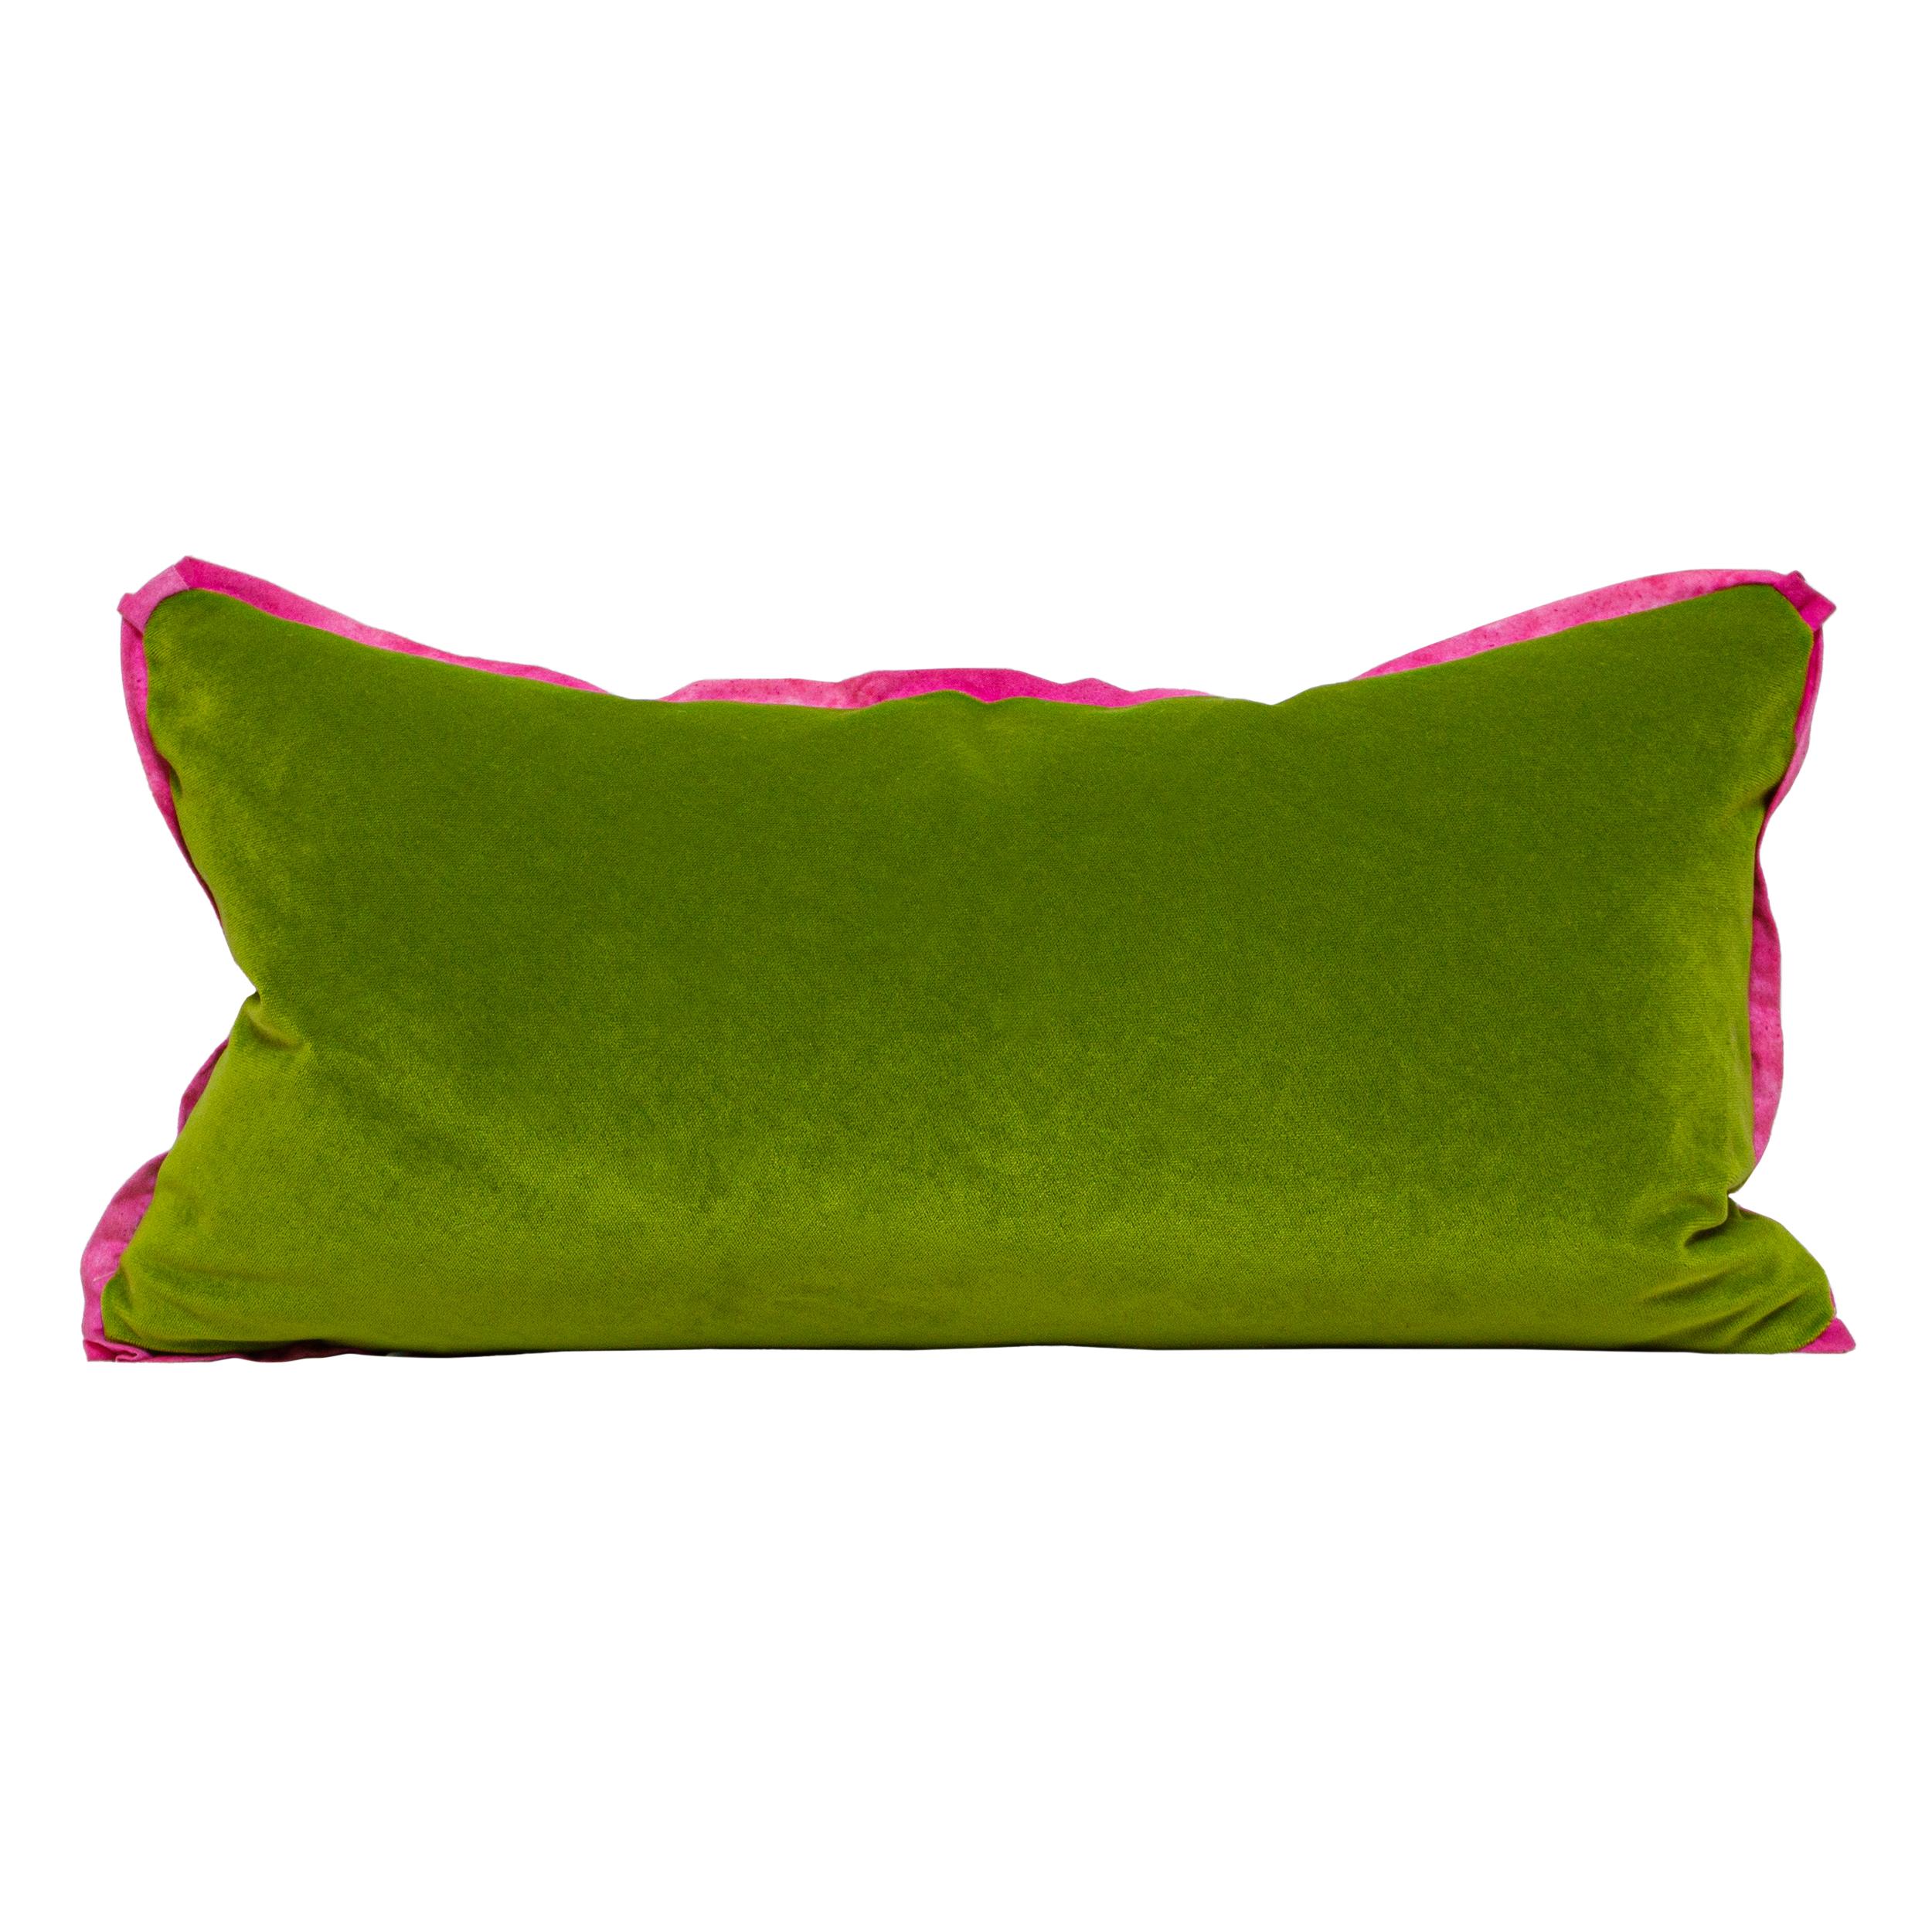 American Rose and Neutral Printed Floral Lumbar Pillows w Pink Flange + Green Velvet Back For Sale